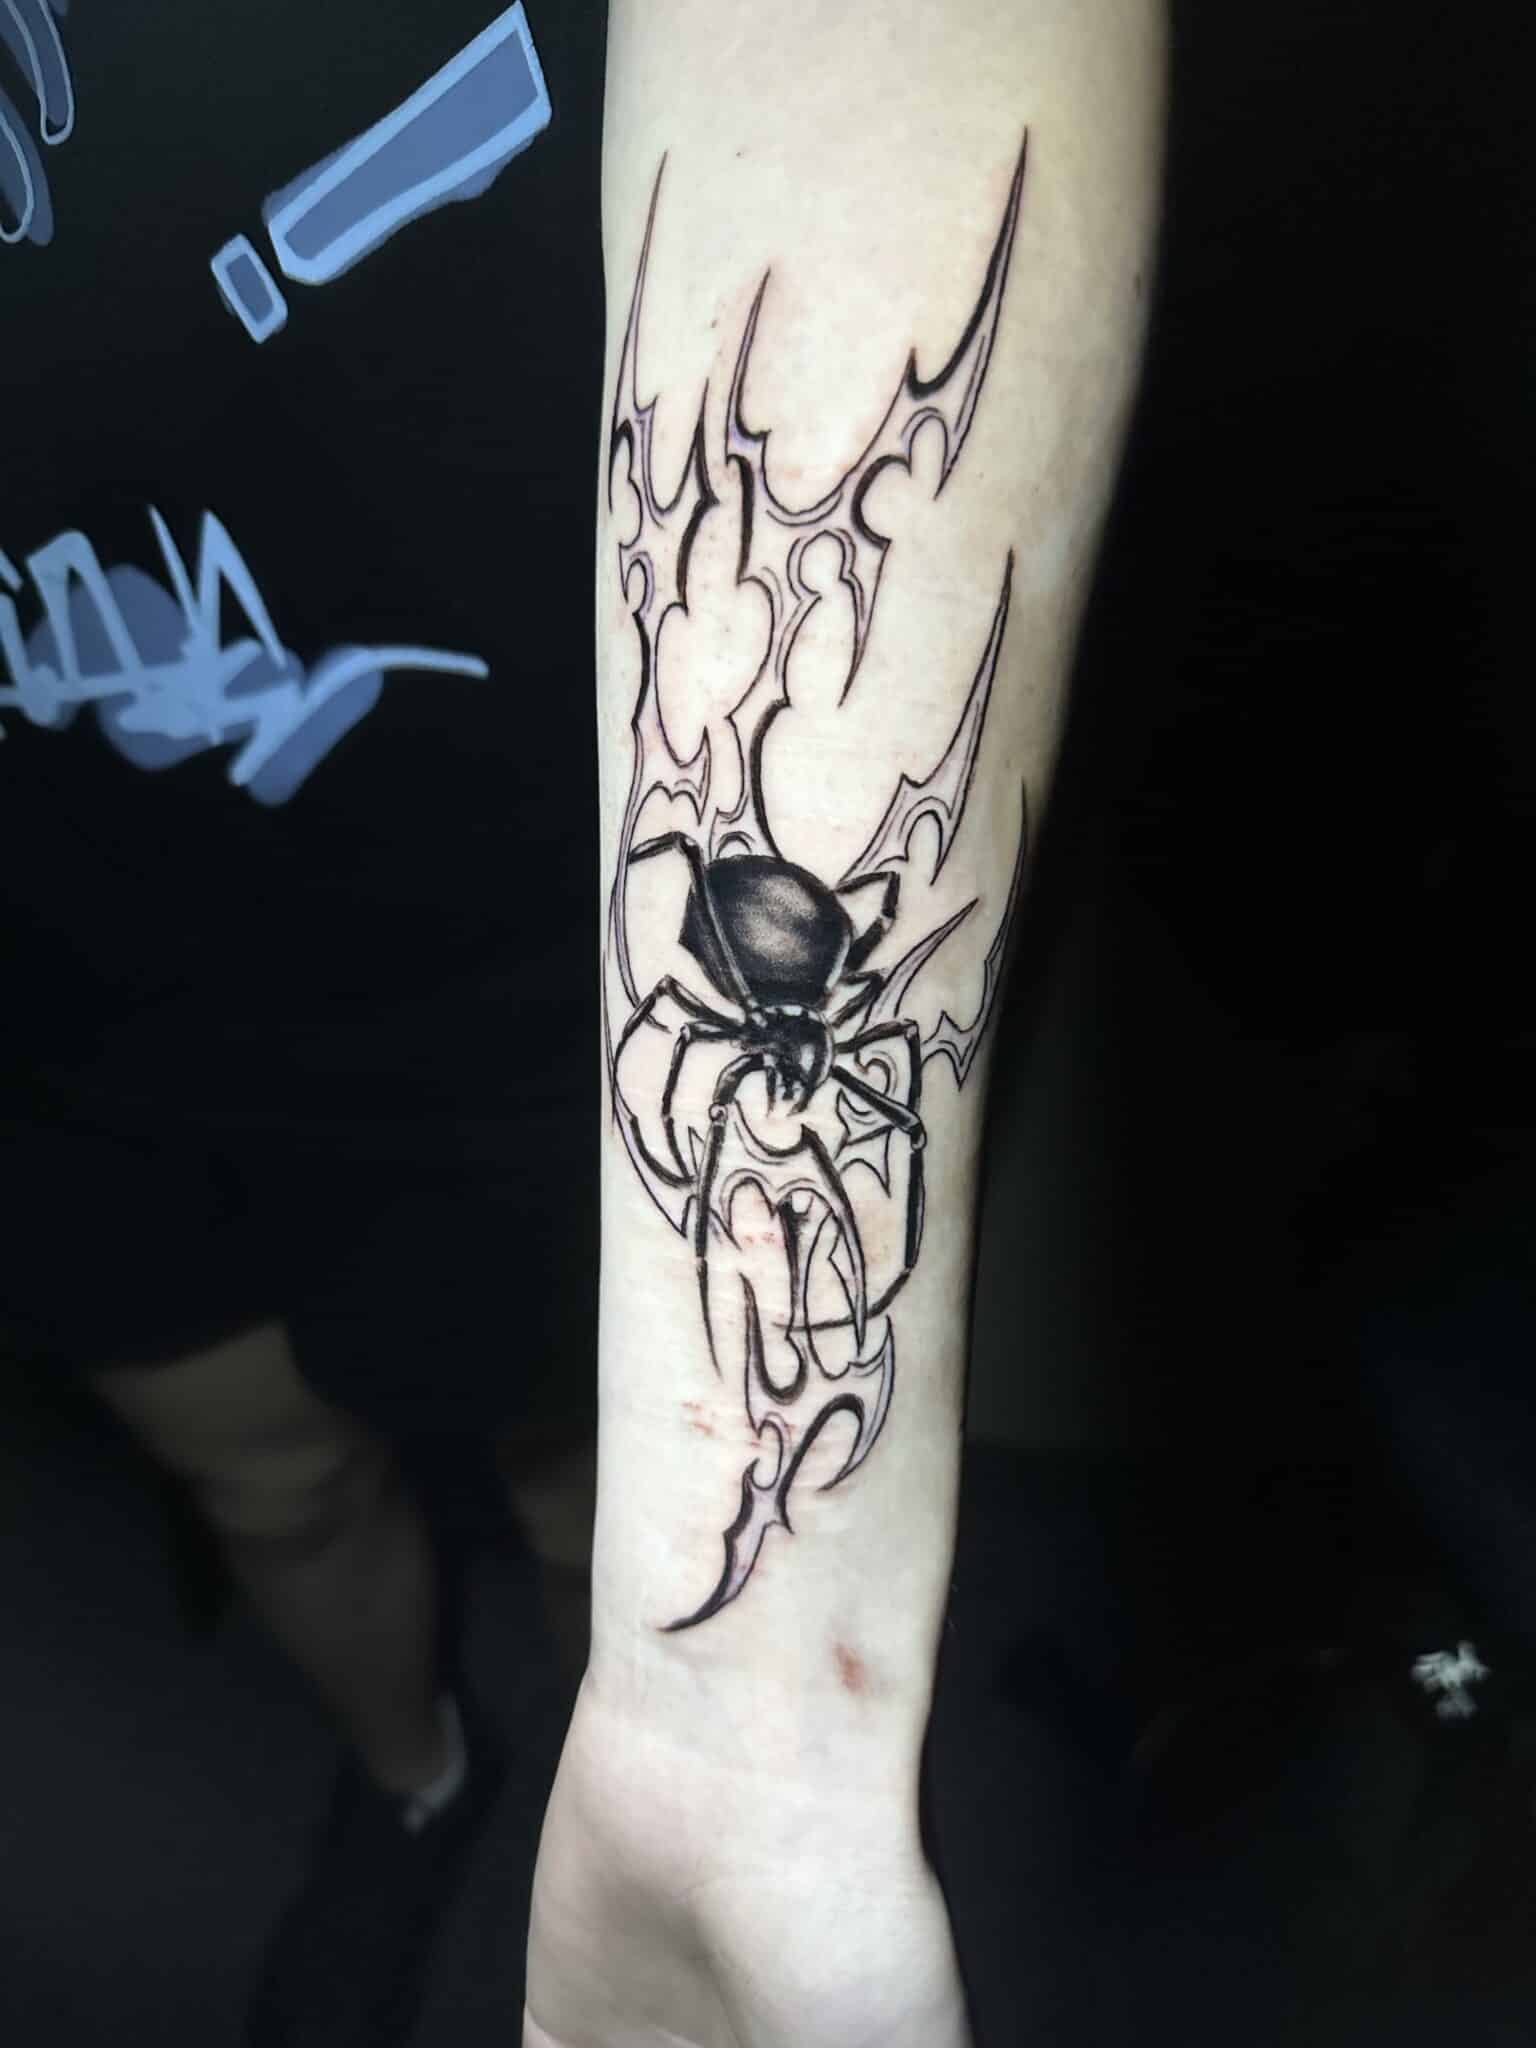 Spider tattoo over forearm